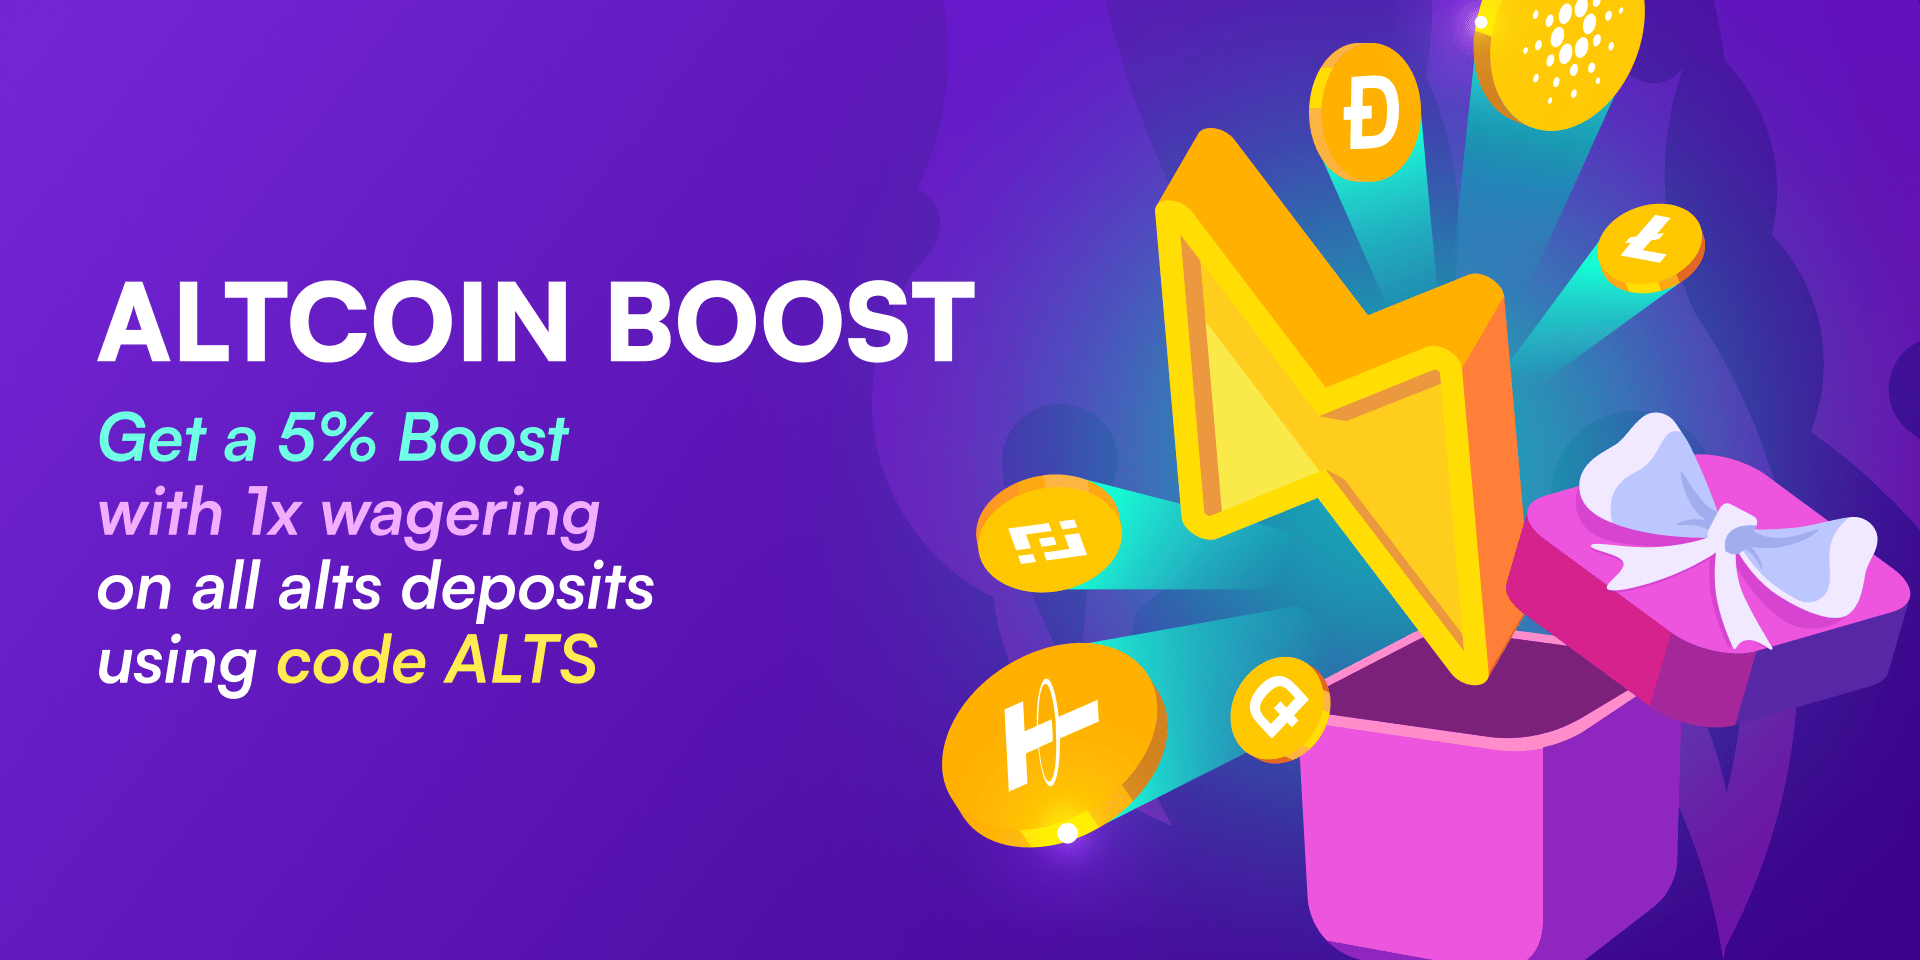 Promotion Altcoin Boost